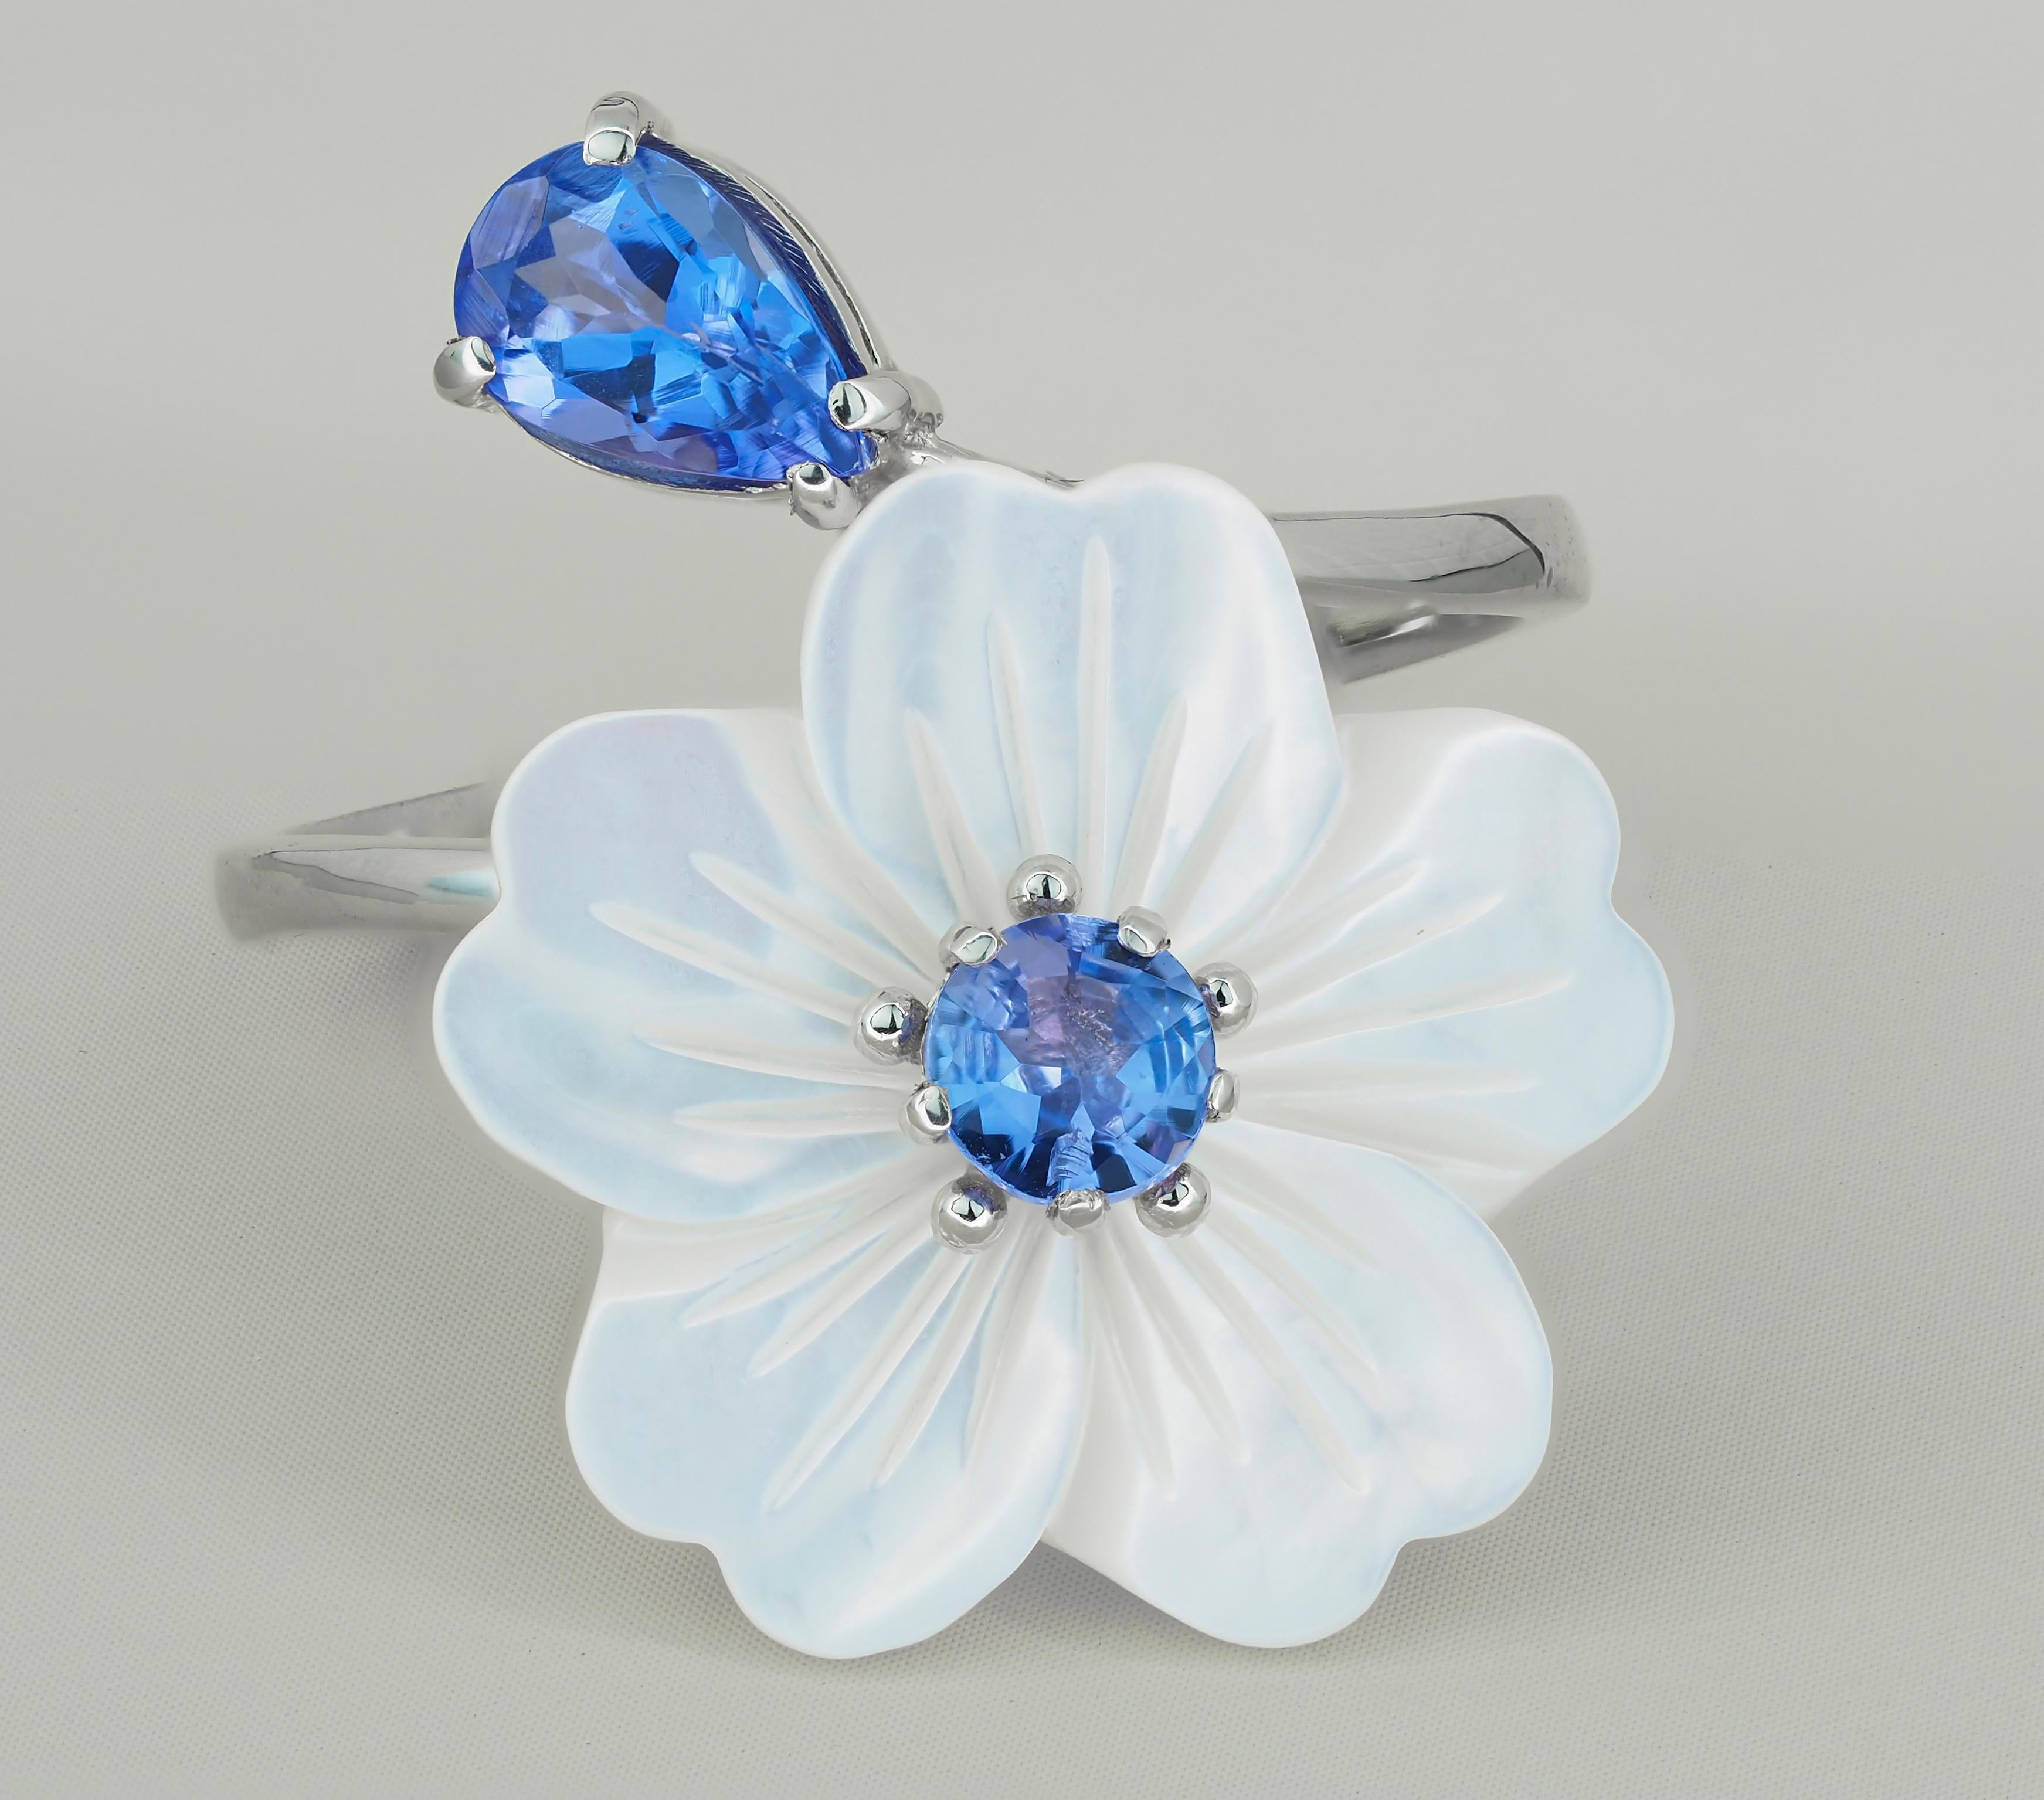 Sapphire 14k gold ring. 
Pear sapphire ring. Blue gemstone sapphire ring. Carved mother of pearl flower ring. Flower gold ring.

Metal: 14k solid gold
Weight: 2.4 g (depends from size).

Main stone - sapphire, yellow color, pear cut, 0.60 ct weight,